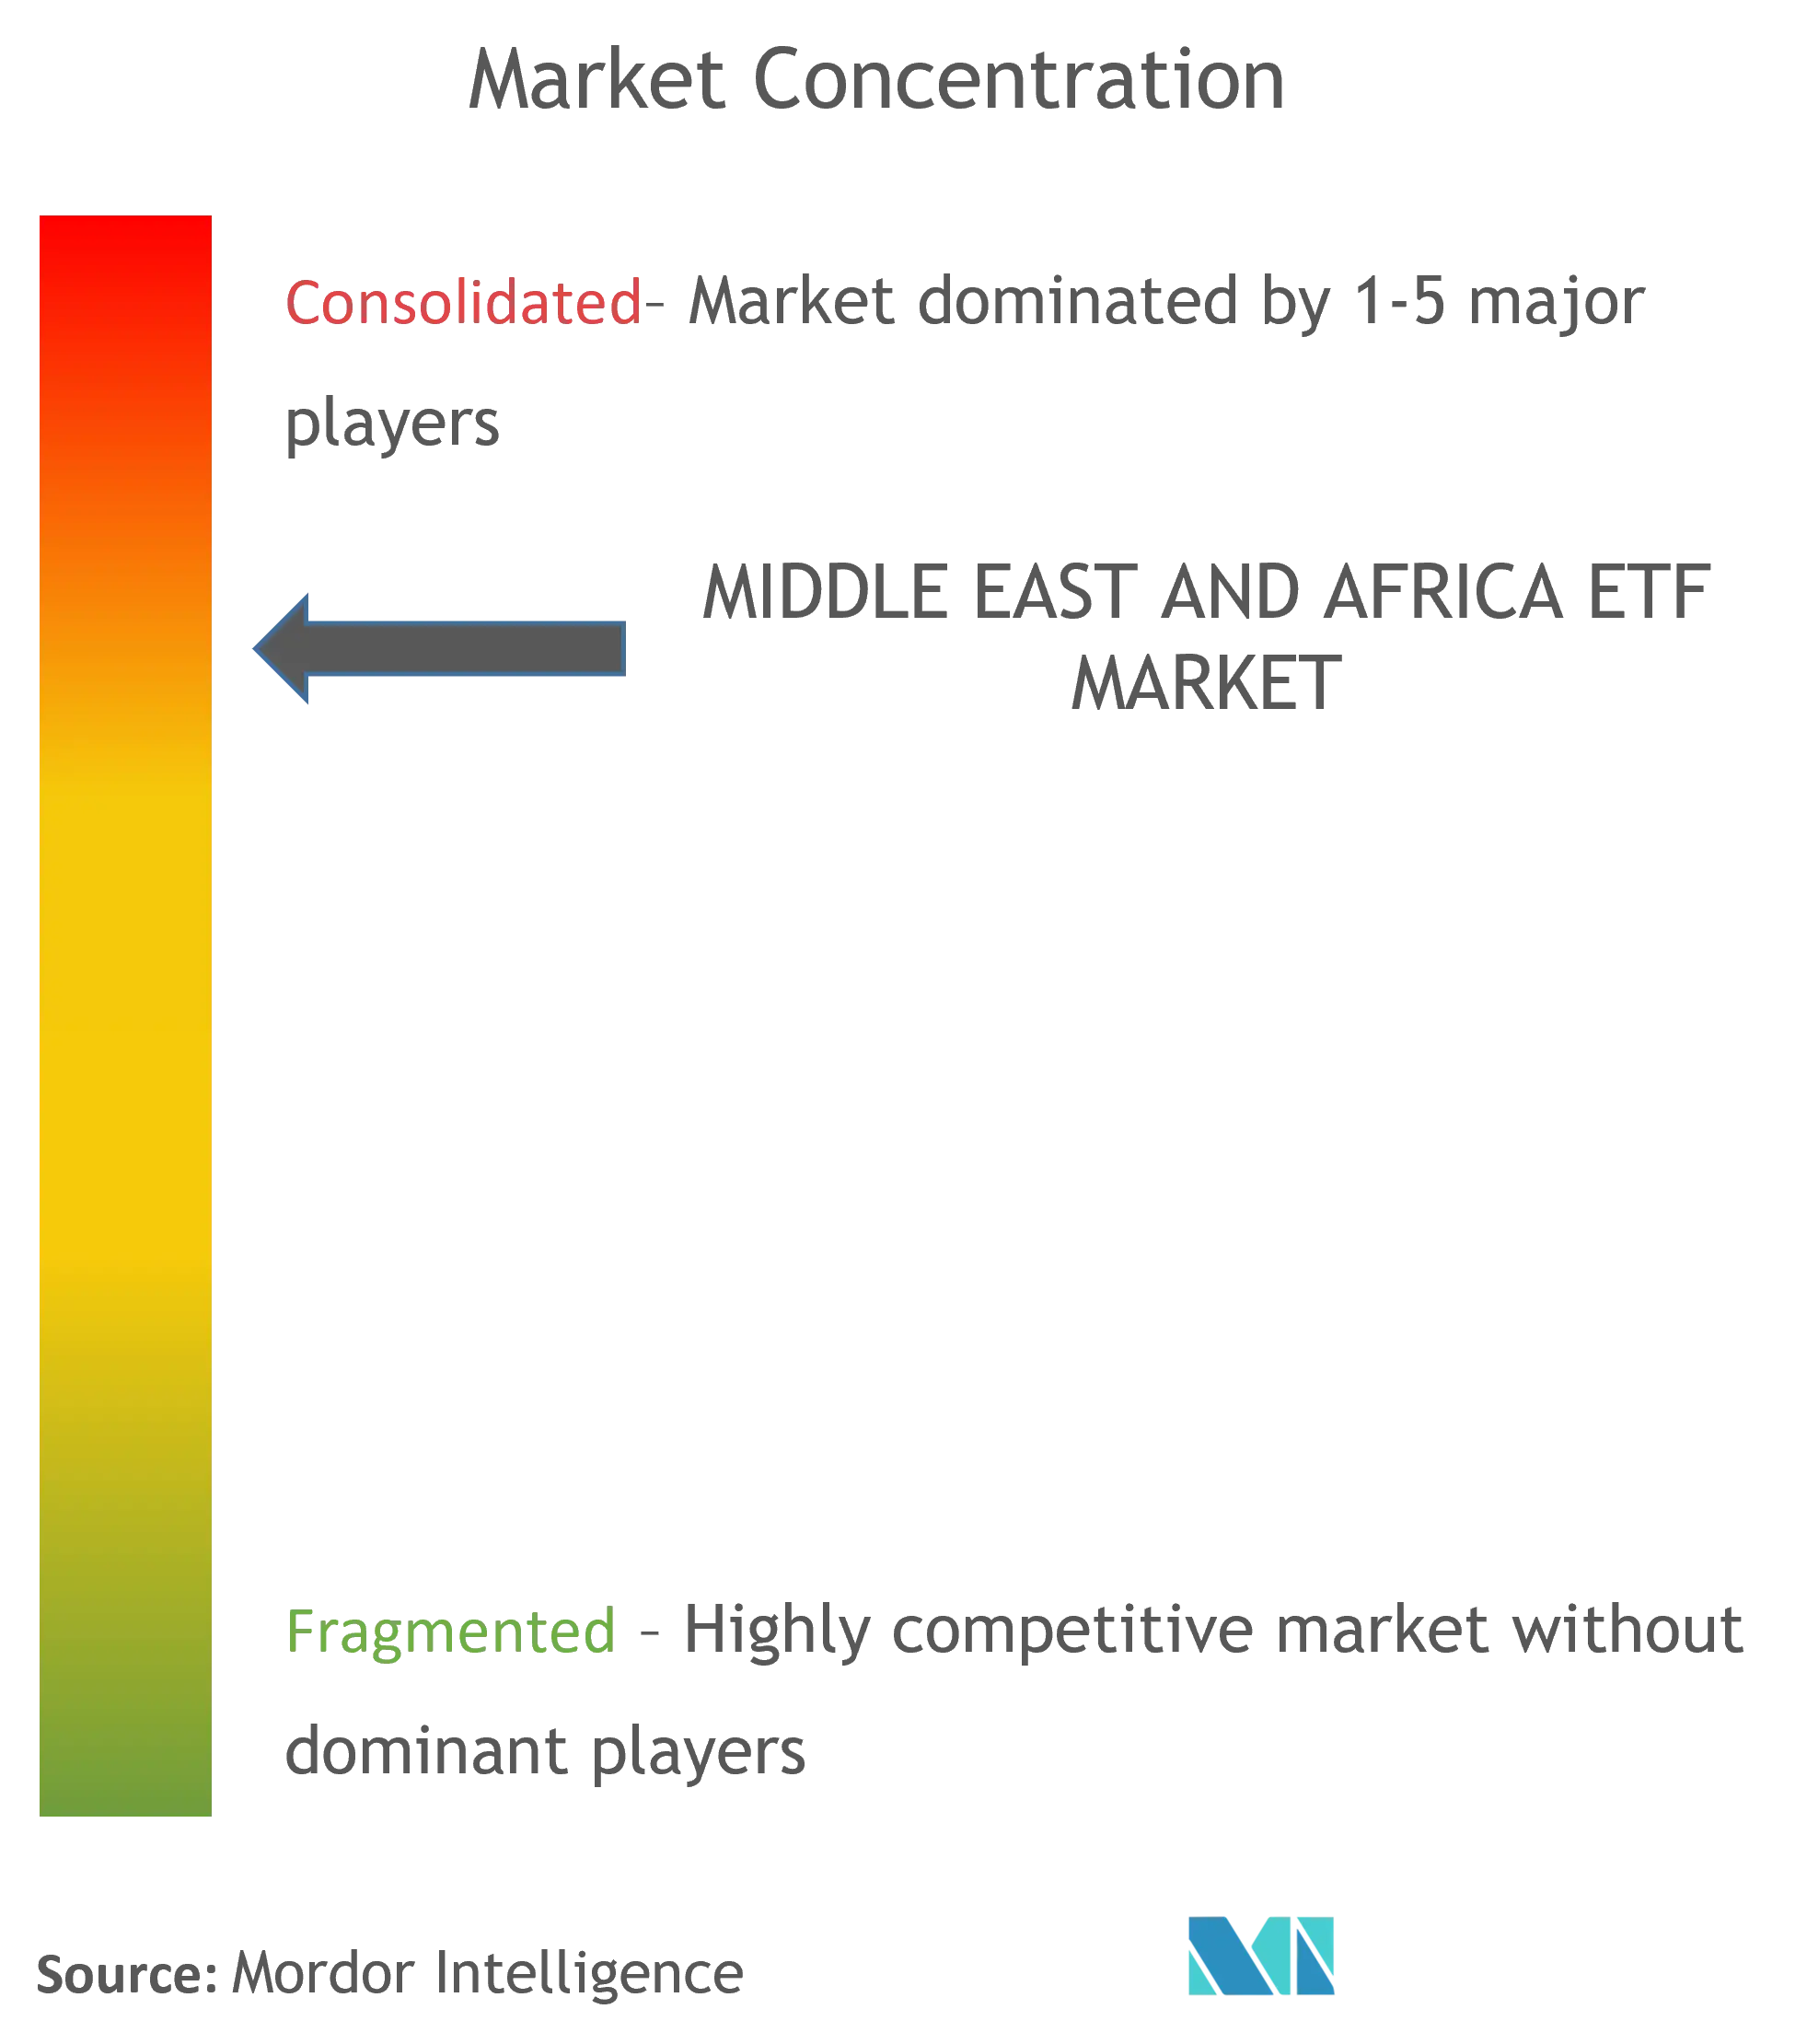 Middle East And Africa ETF Market Concentration